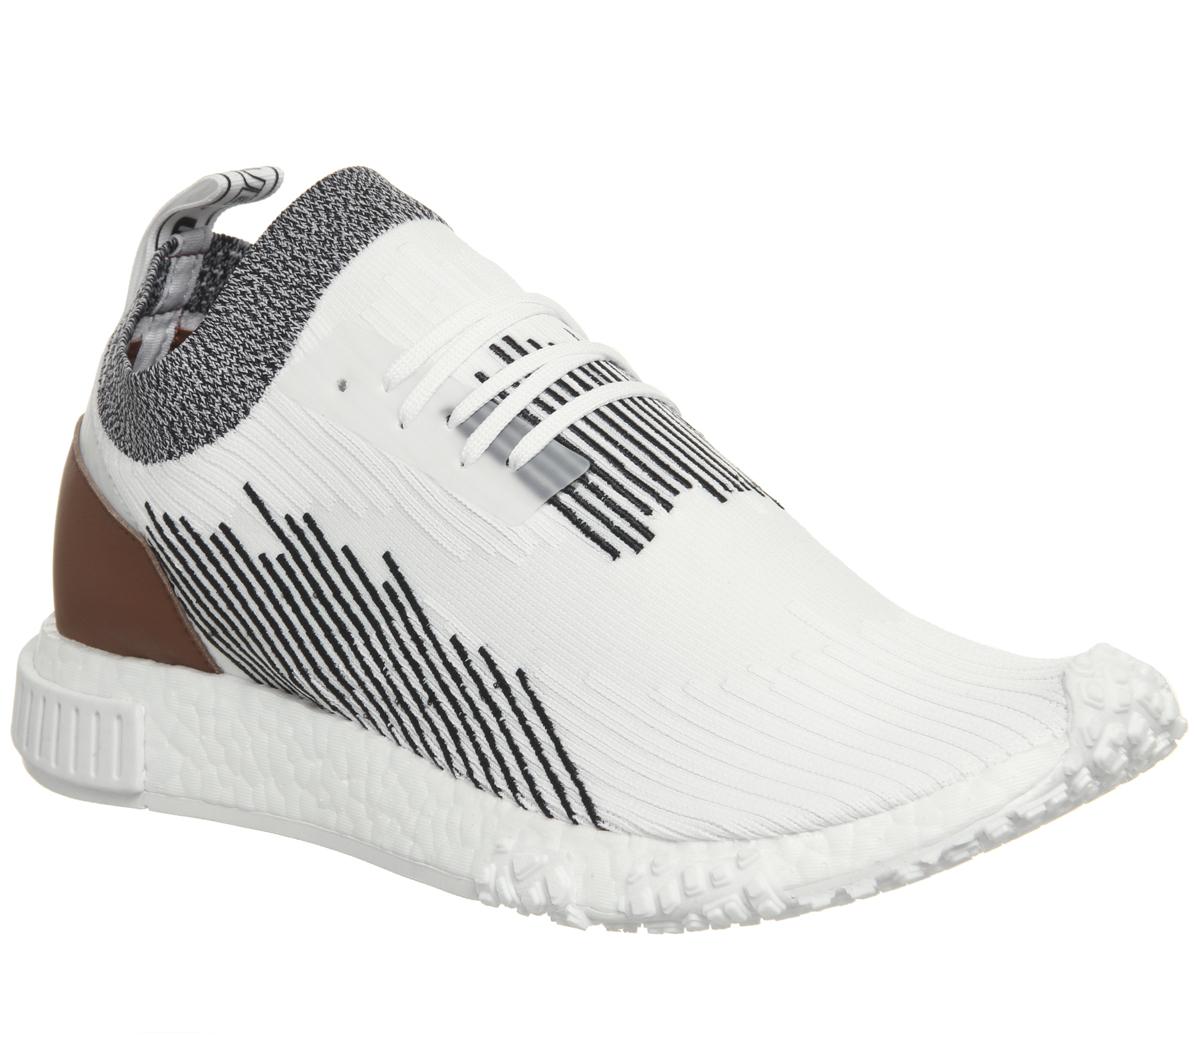 nmd racer primeknit trainers